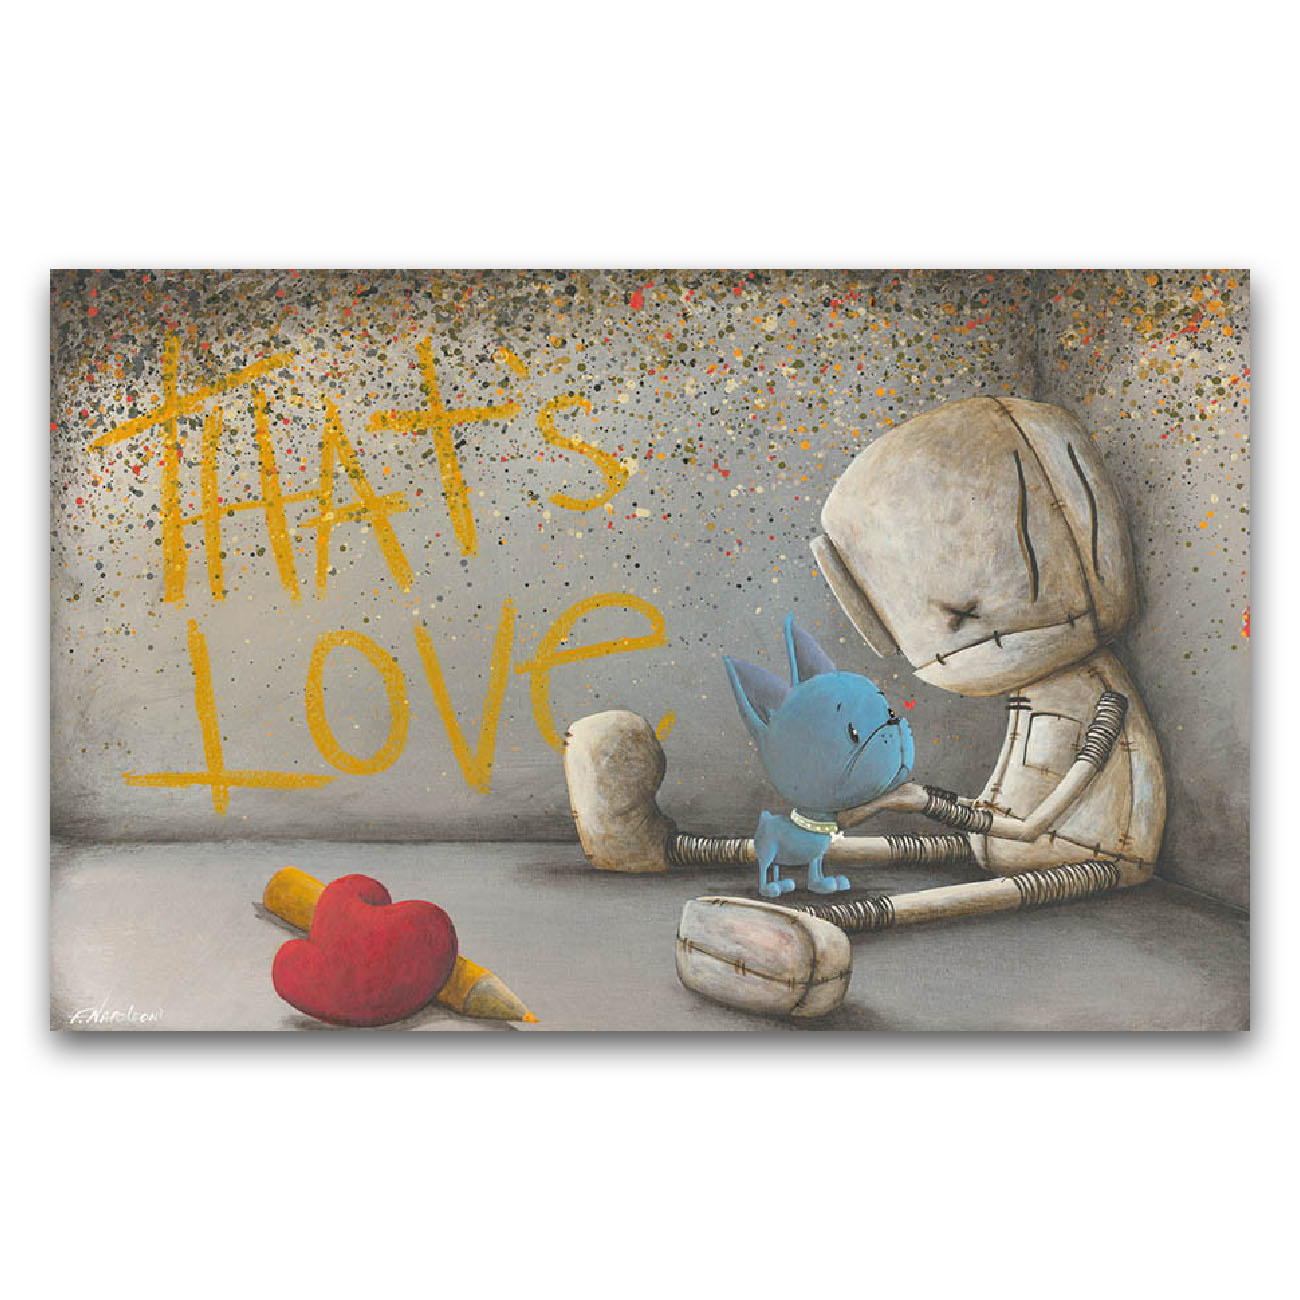 Fabio Napoleoni "Unbounded Affection" Limited Edition Canvas Giclee